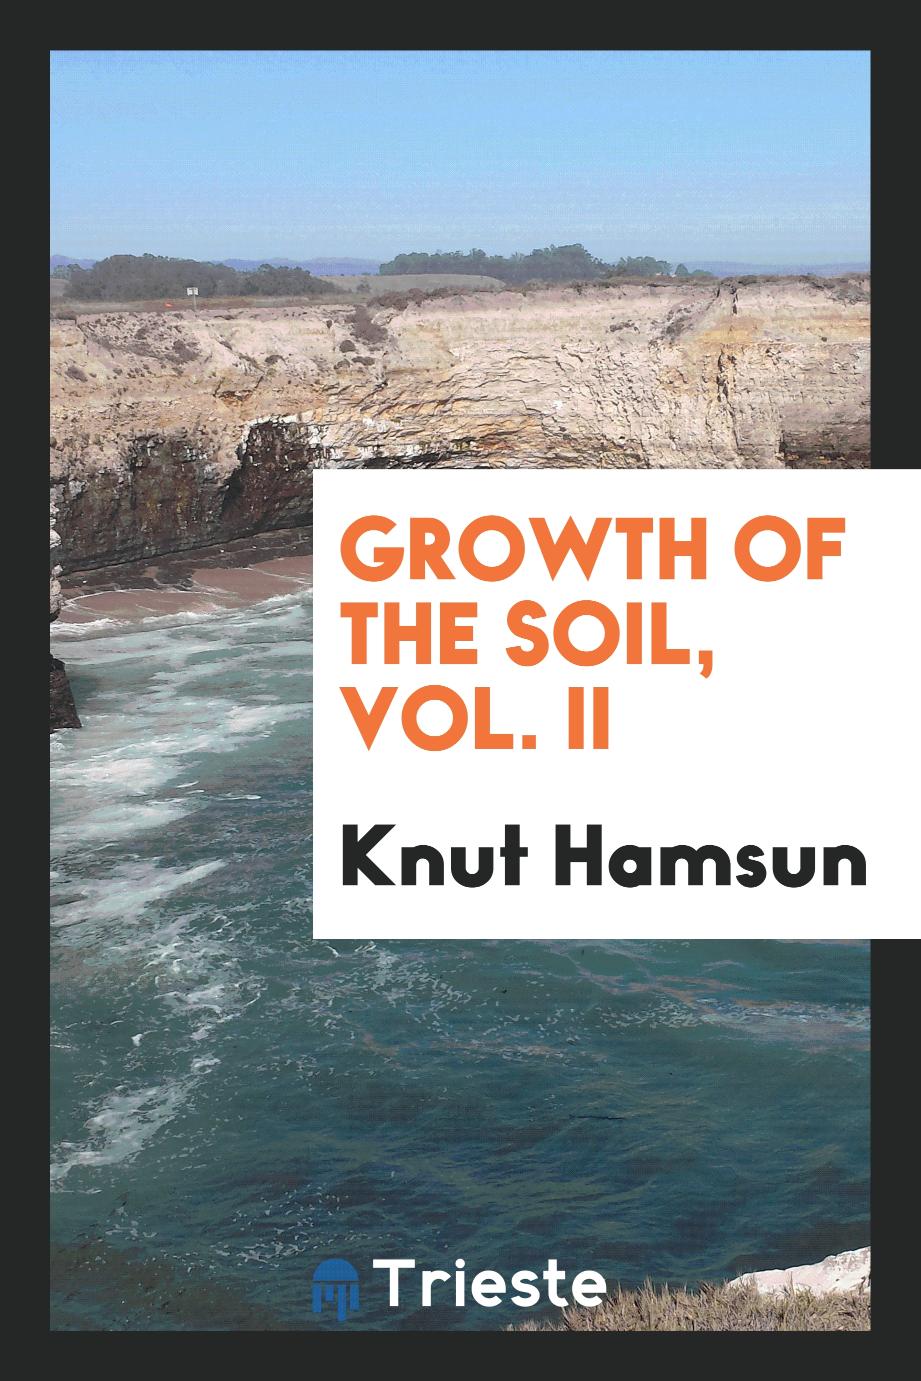 Growth of the soil, Vol. II